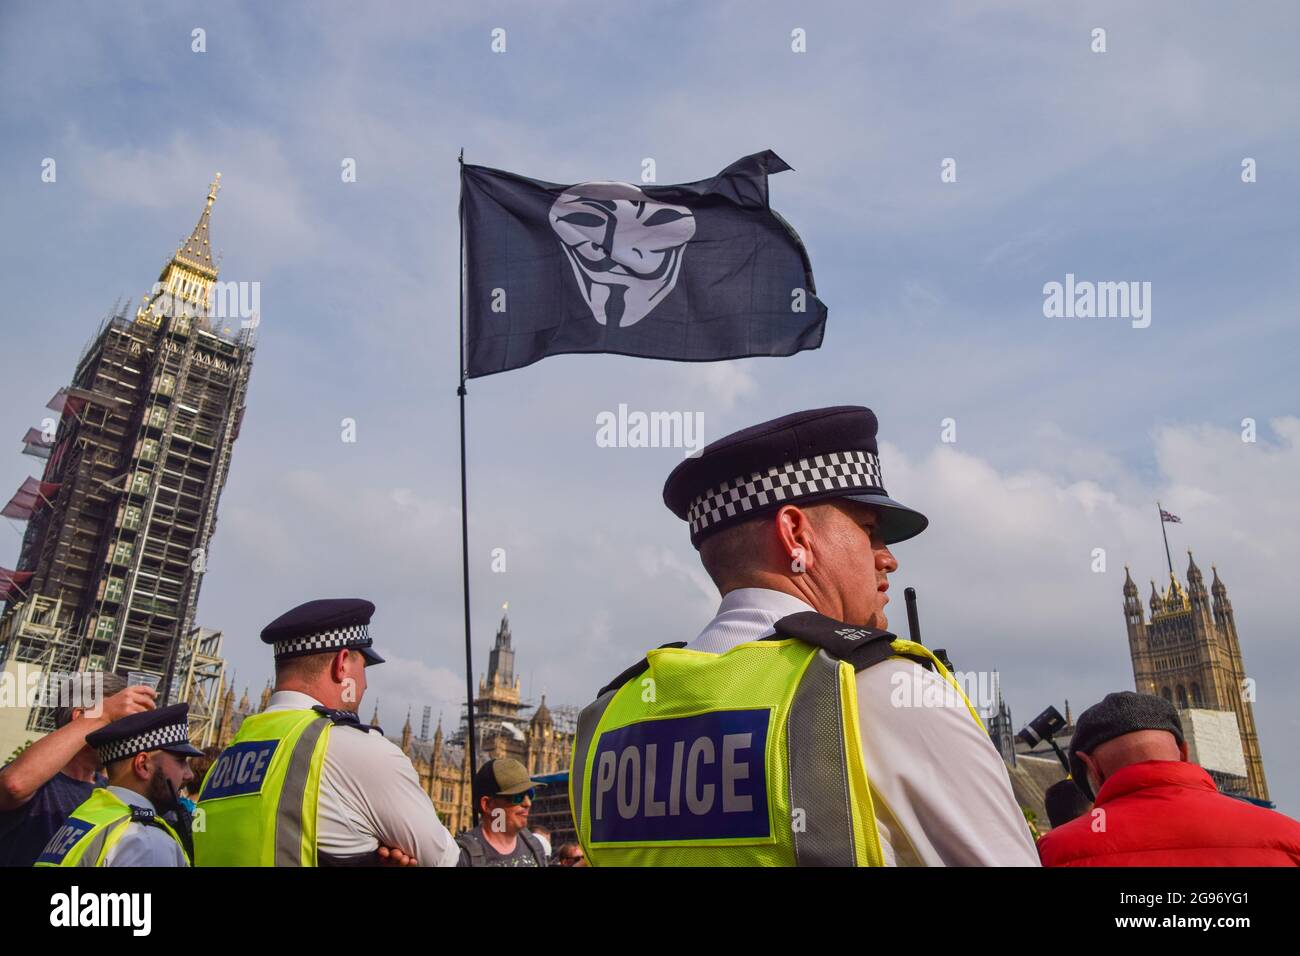 London, United Kingdom. 24th July 2021. Protesters in Parliament Square. Thousands of protesters gathered in Westminster to protest against COVID-19 vaccinations, vaccine passports, and coronavirus restrictions, with many demonstrators calling the pandemic a 'hoax'. (Credit: Vuk Valcic / Alamy Live News) Stock Photo